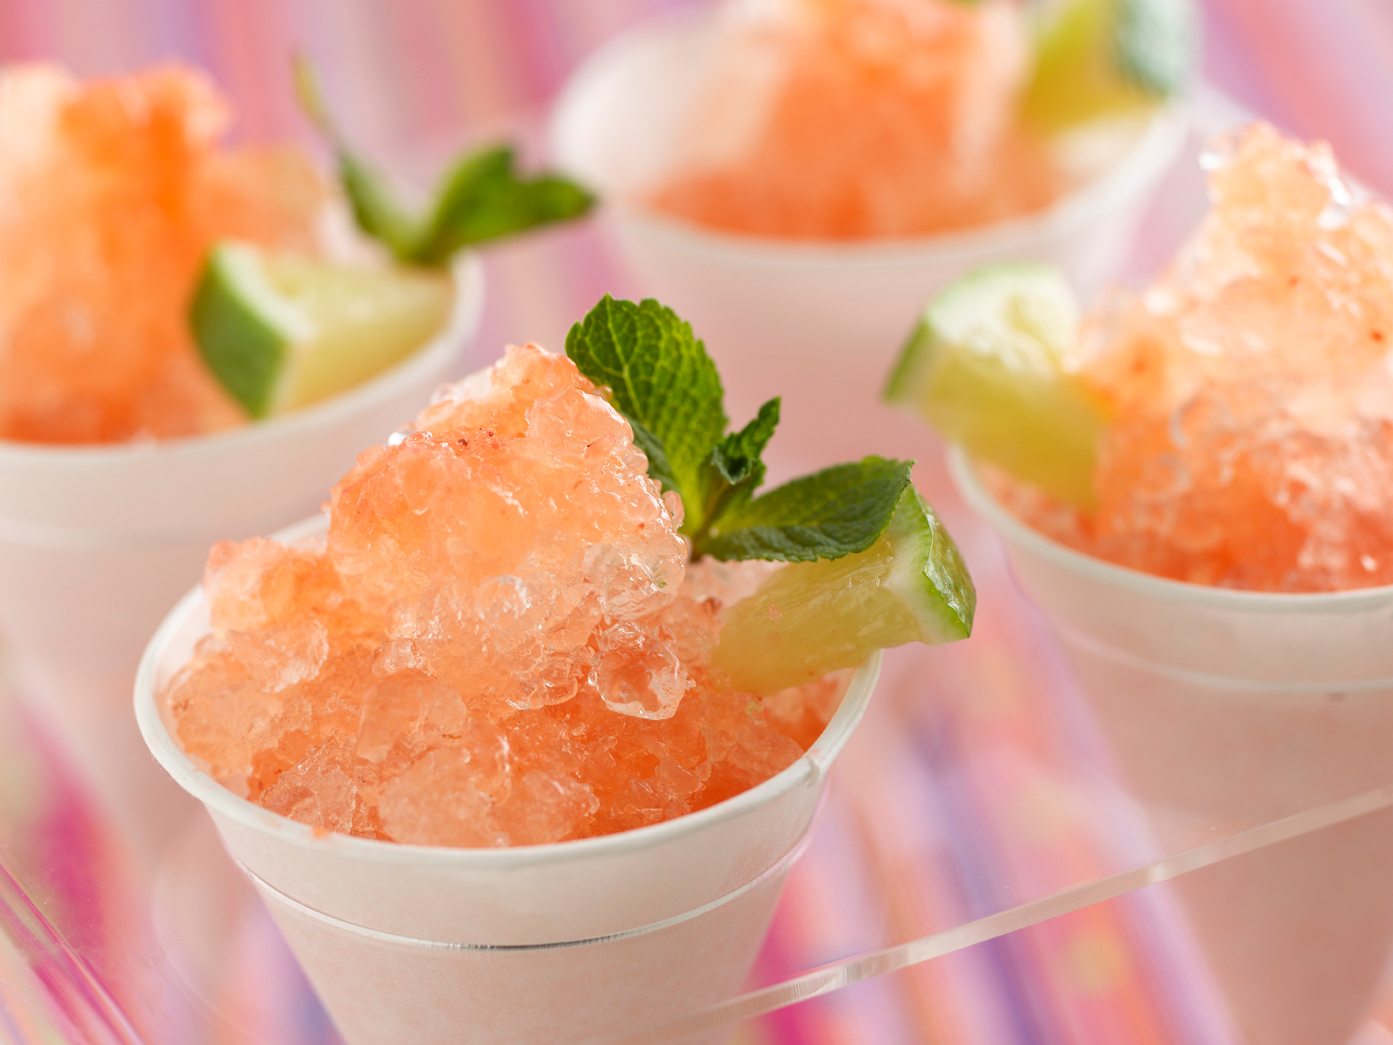 Strawberry snow cone- crushed ice, a splash of lemon juice, and